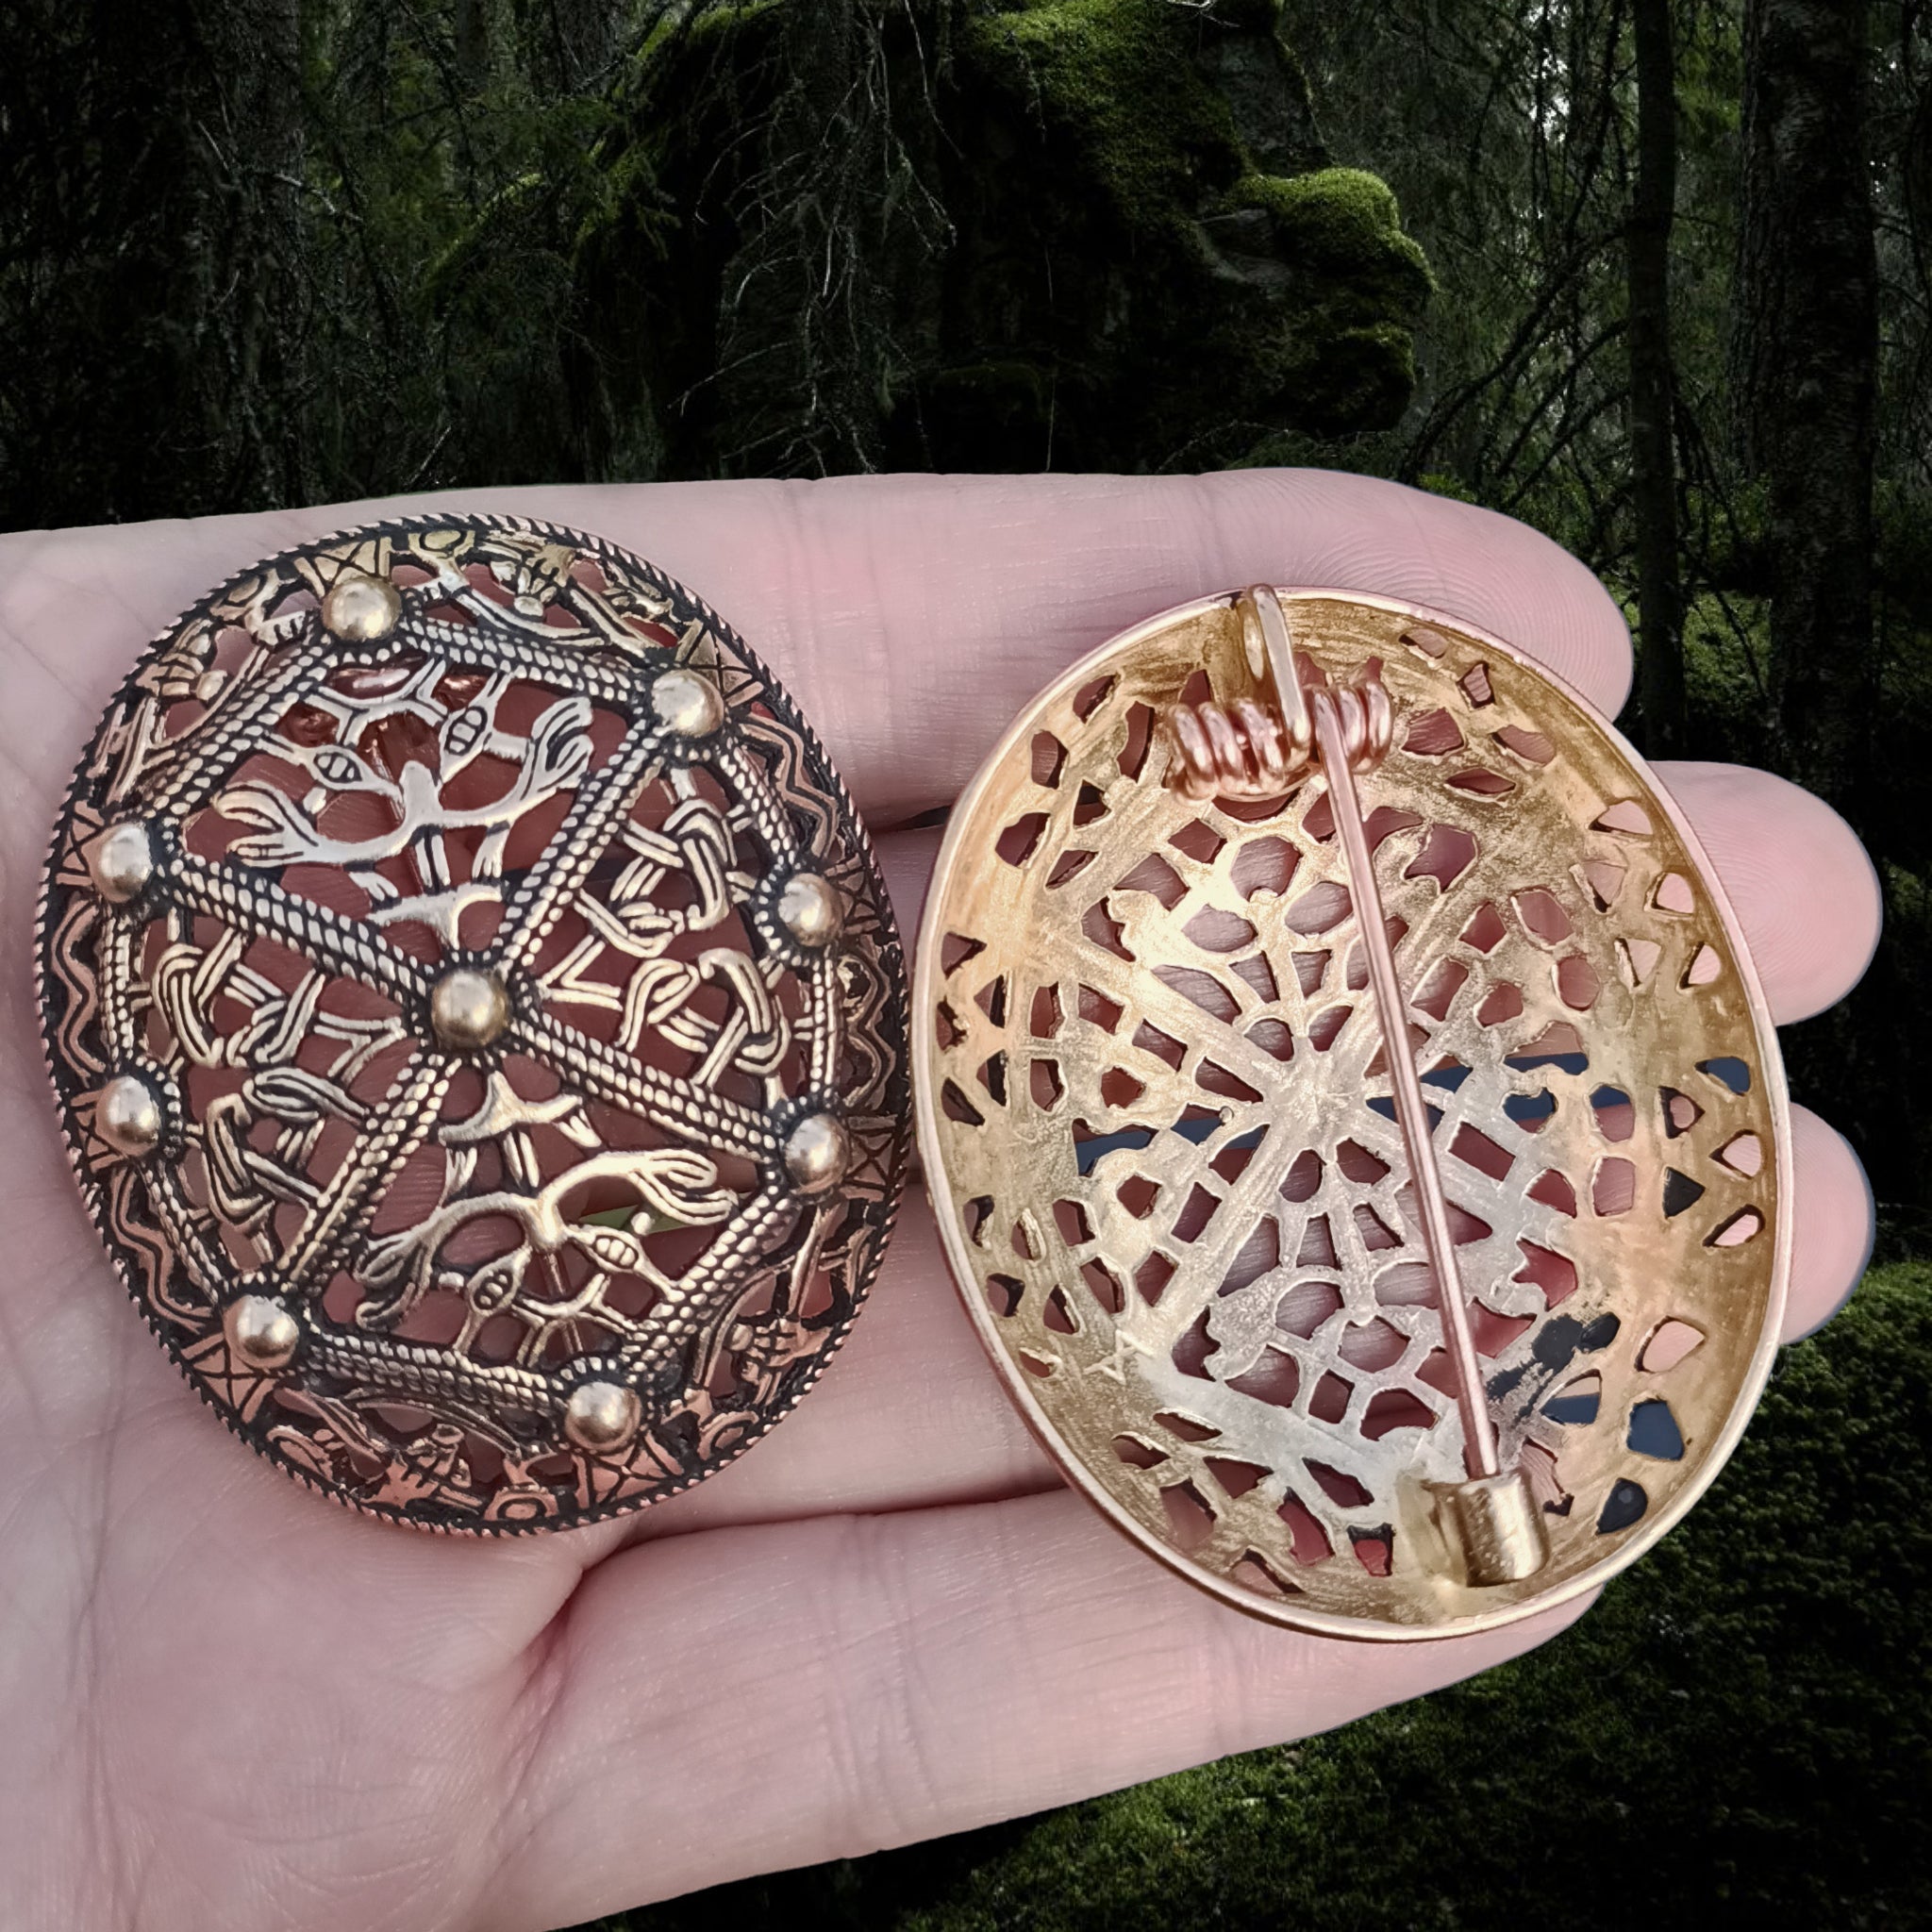 Bronze Borre Style Openwork Akershus Viking Tortoise Brooches in Hand - Front and Back